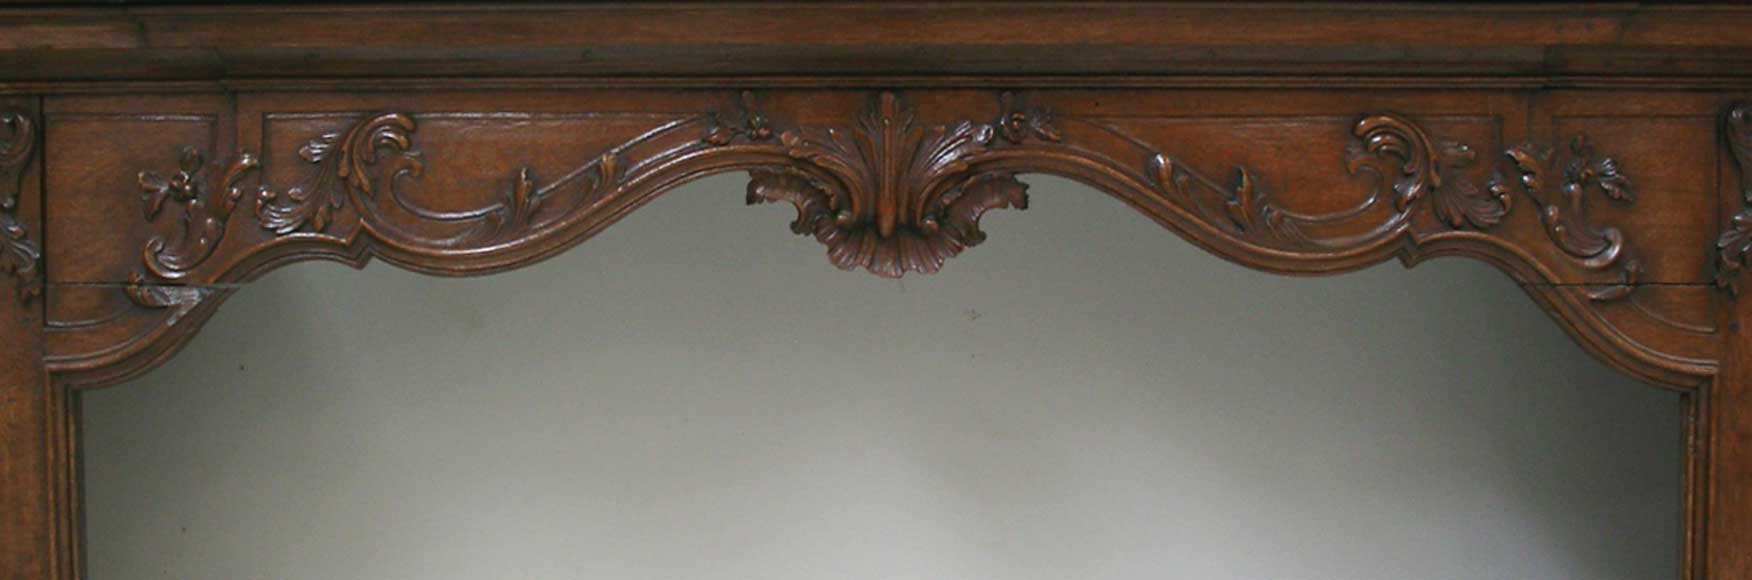 Oak mantle and trumeau with portrait of lady-1